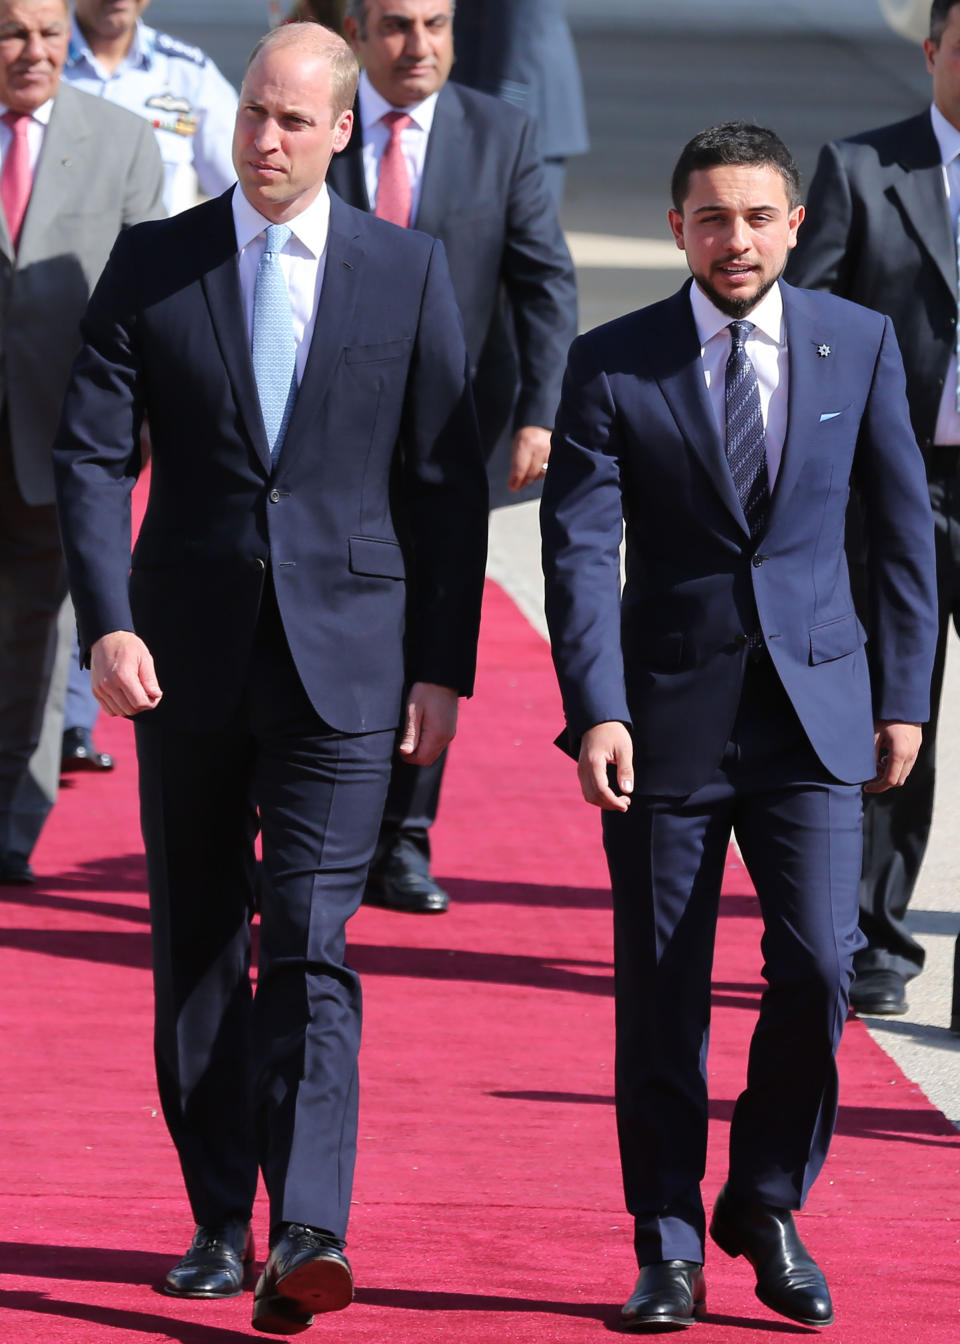 <p>Crown Prince Hussein bin Abdullah is the 23-year-old heir to the Jordanian throne. He was the first person Prince William met when he stepped off the plane in Jordan yesterday as part of his five-day tour of the Middle East. Photo: Getty Images </p>